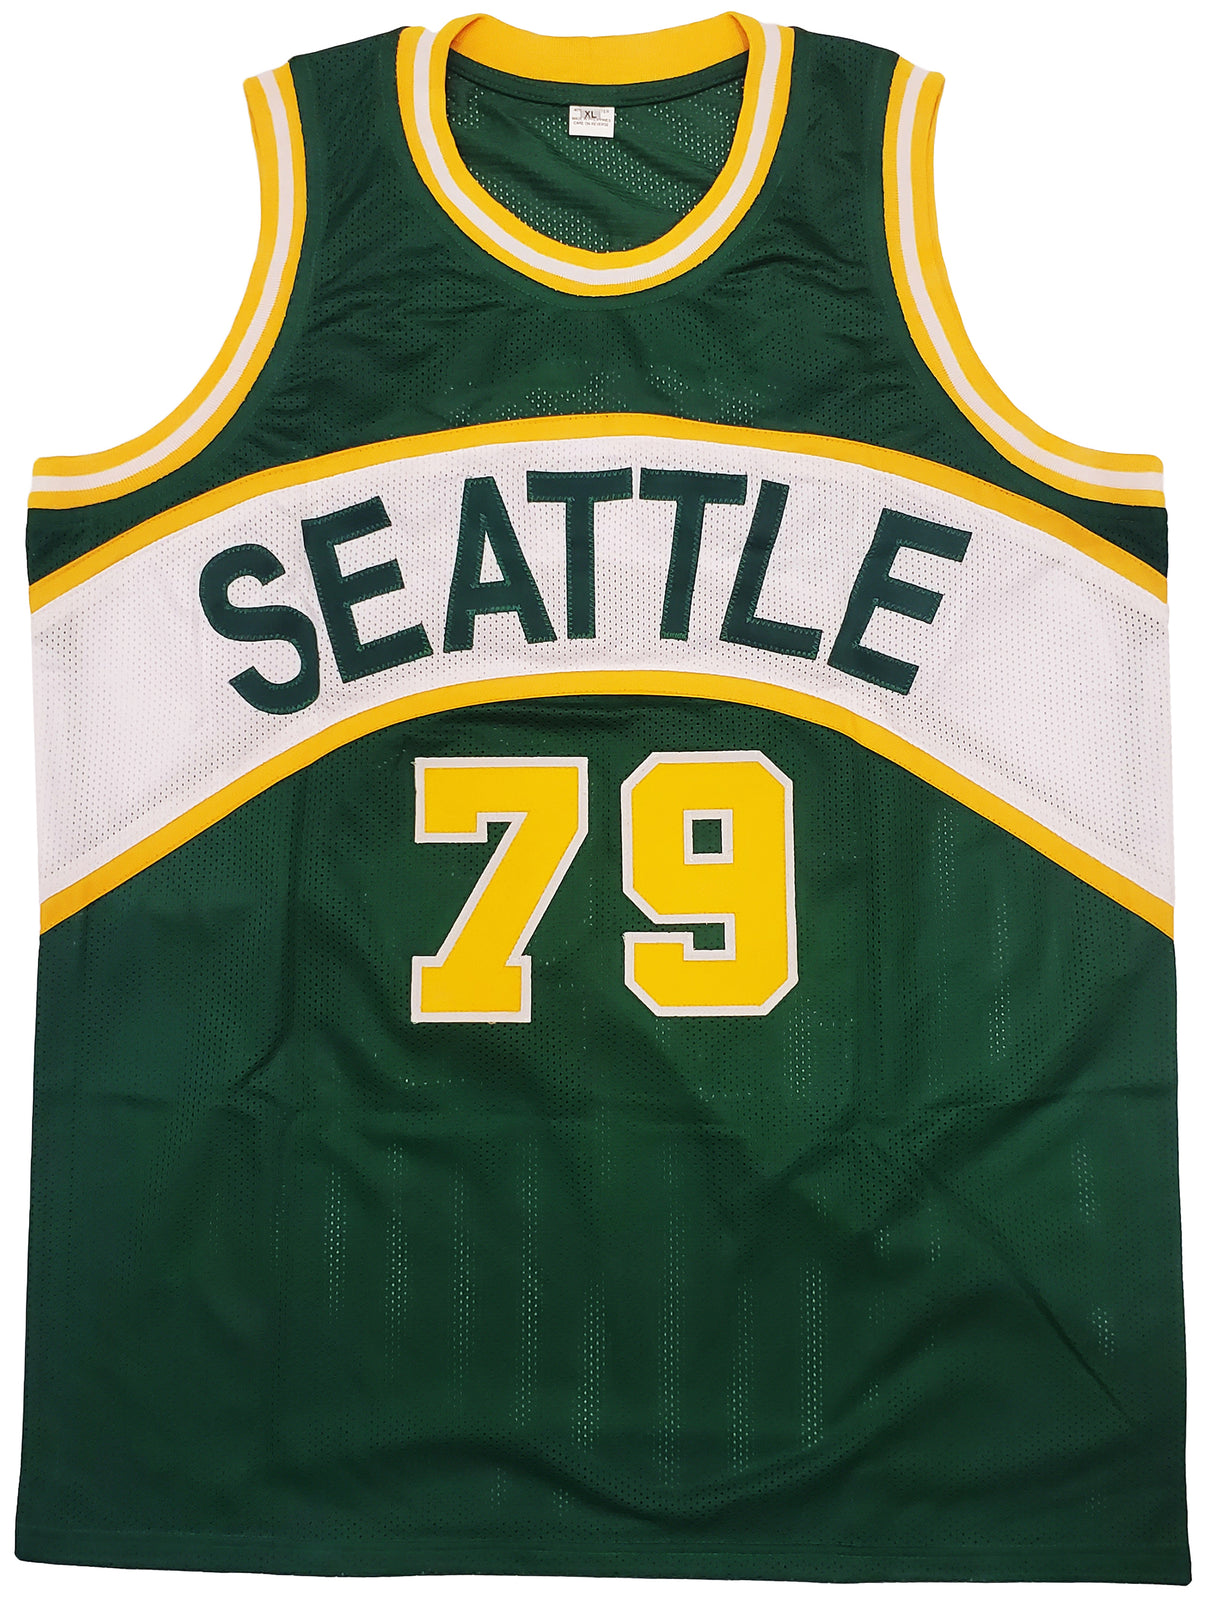 1978-79 NBA Champions Seattle Supersonics Multi Signed Autographed Green Jersey With 8 Signatures Including Fred Brown & Gus Williams MCS Holo Stock #145850